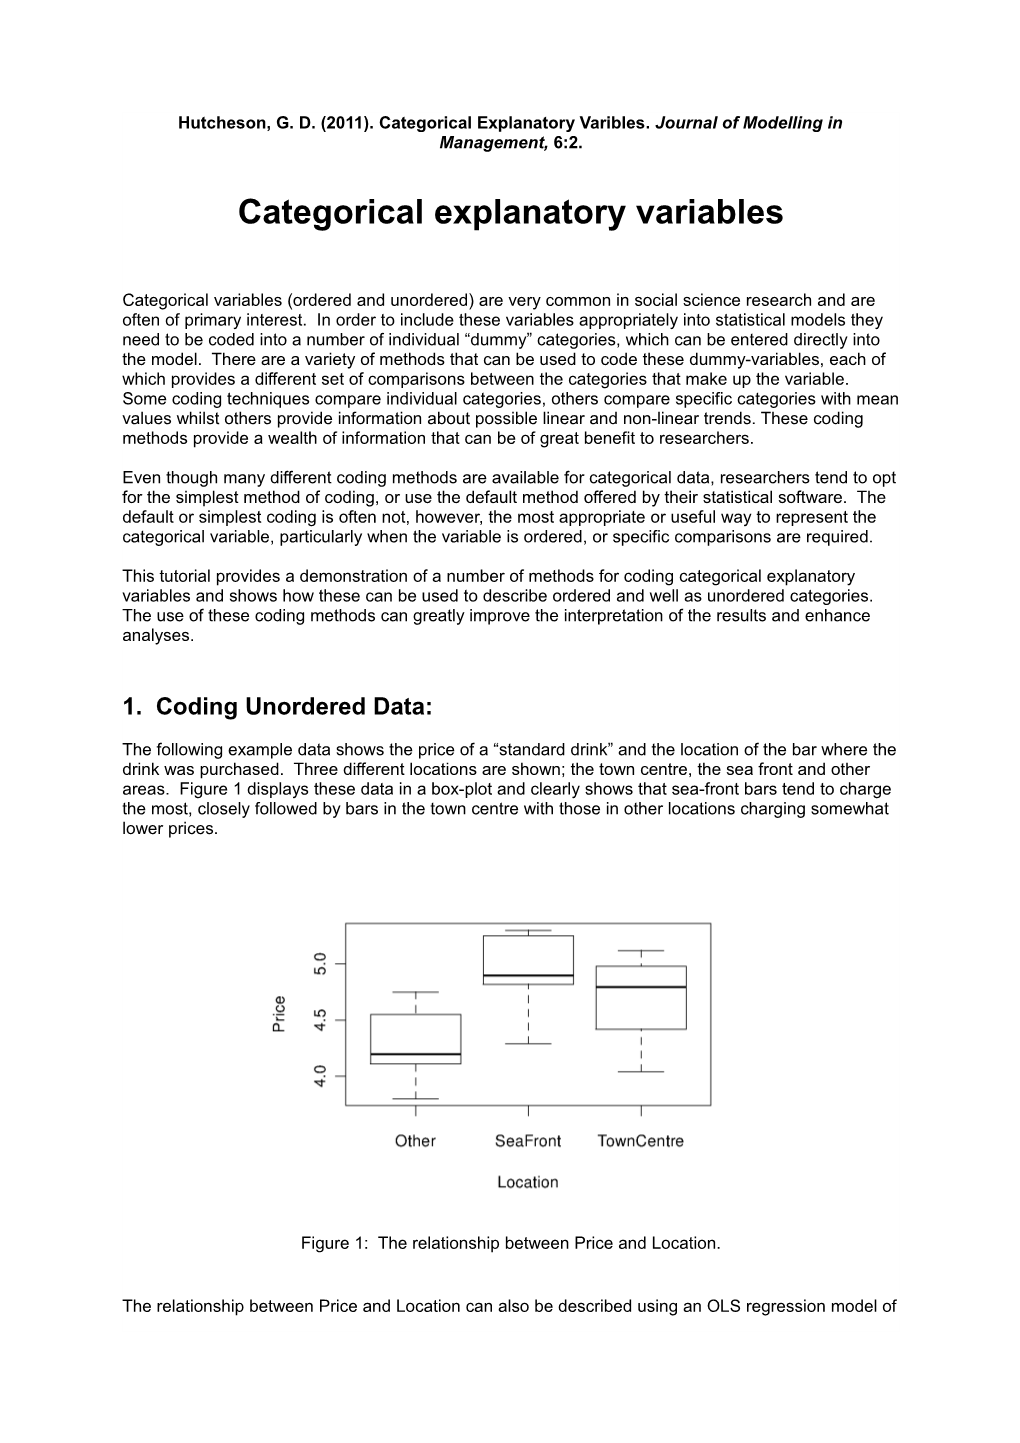 Hutcheson, G. D. (2011). Categorical Explanatory Varibles. Journal of Modelling in Management